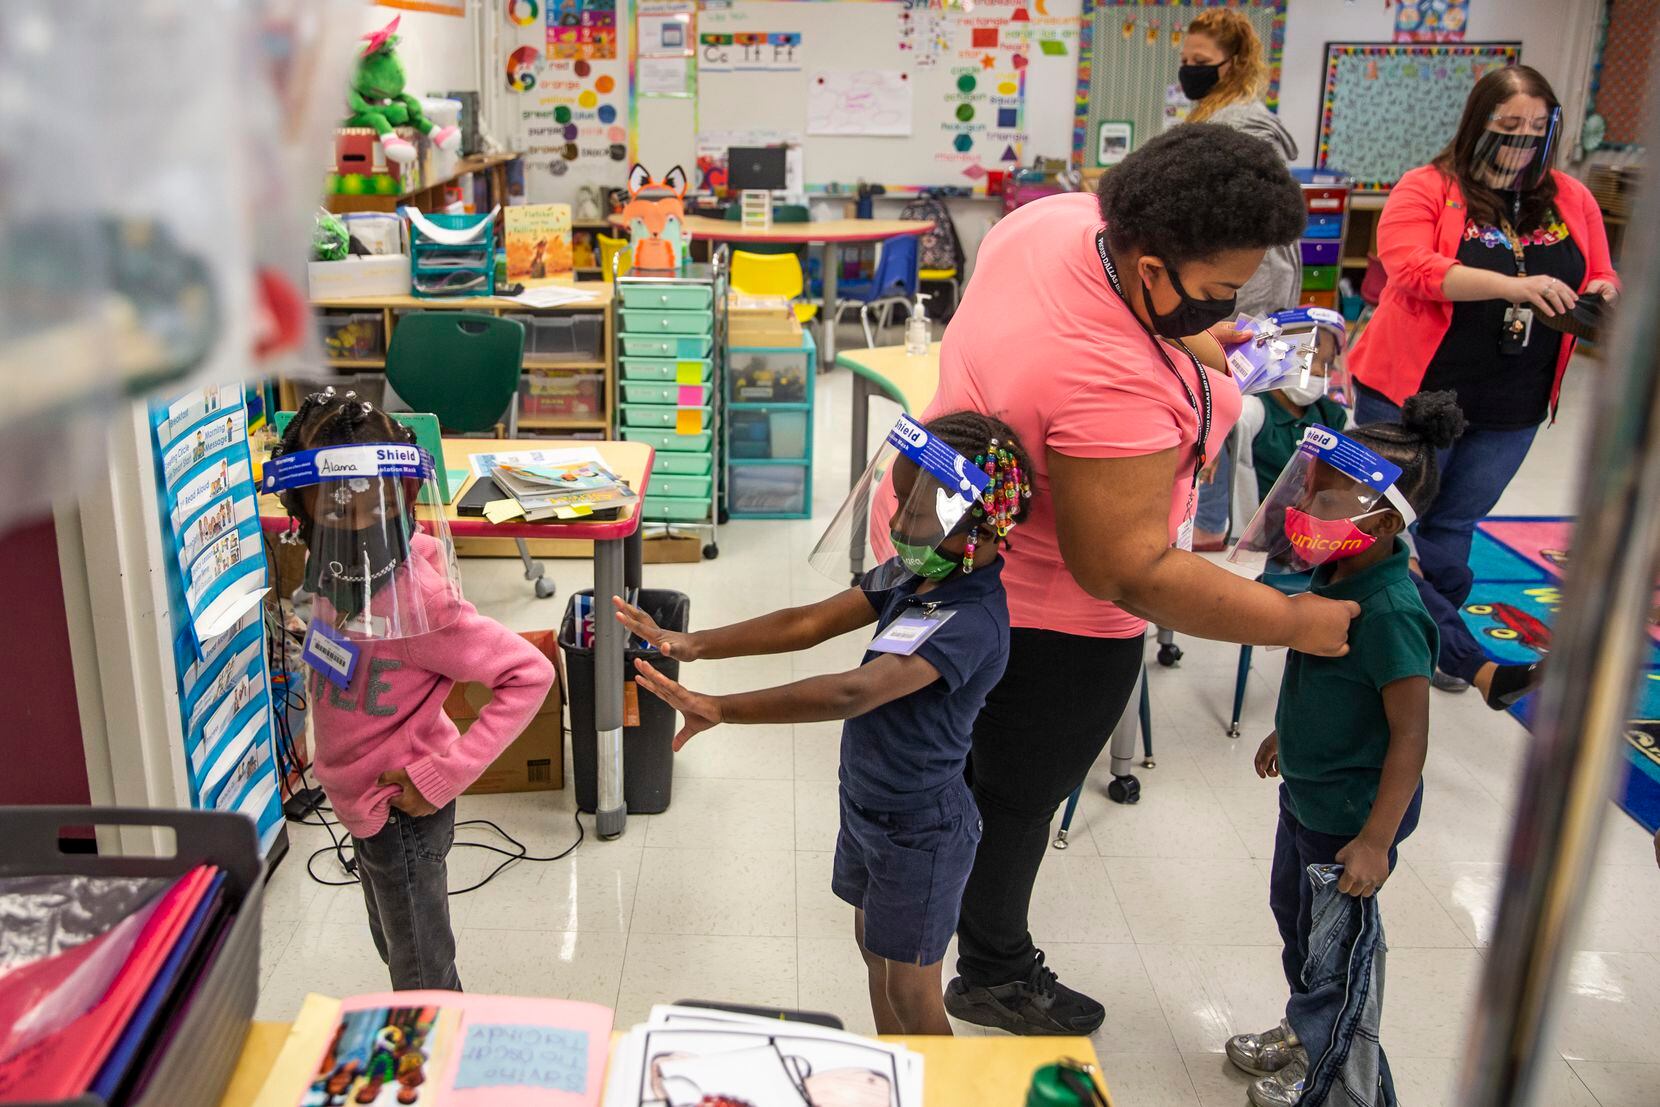 Teachers all over North Texas have coped with myriad safety challenges during the pandemic. In this October 2020 photo, teachers help pre-K students at N.W. Harllee Early Childhood Center in Dallas prepare for lunch.